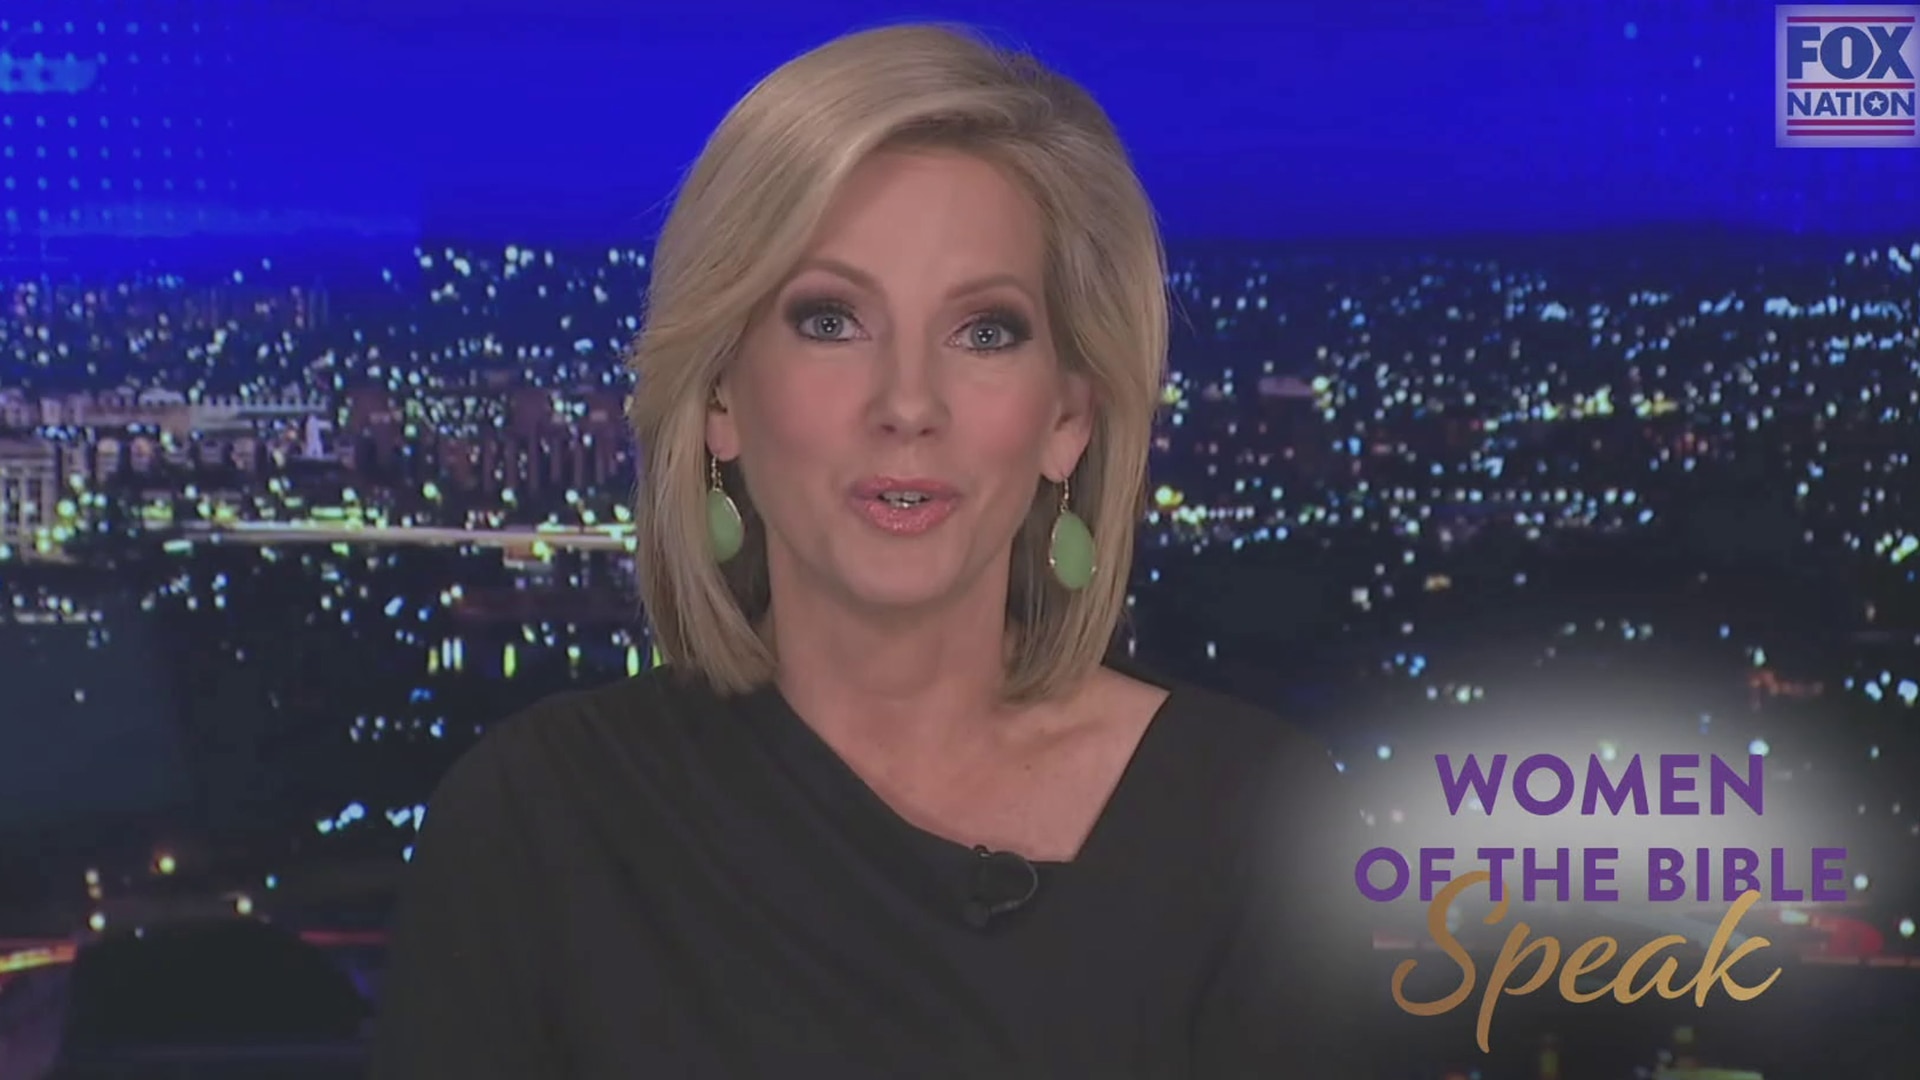 the woman of the bible speak shannon bream